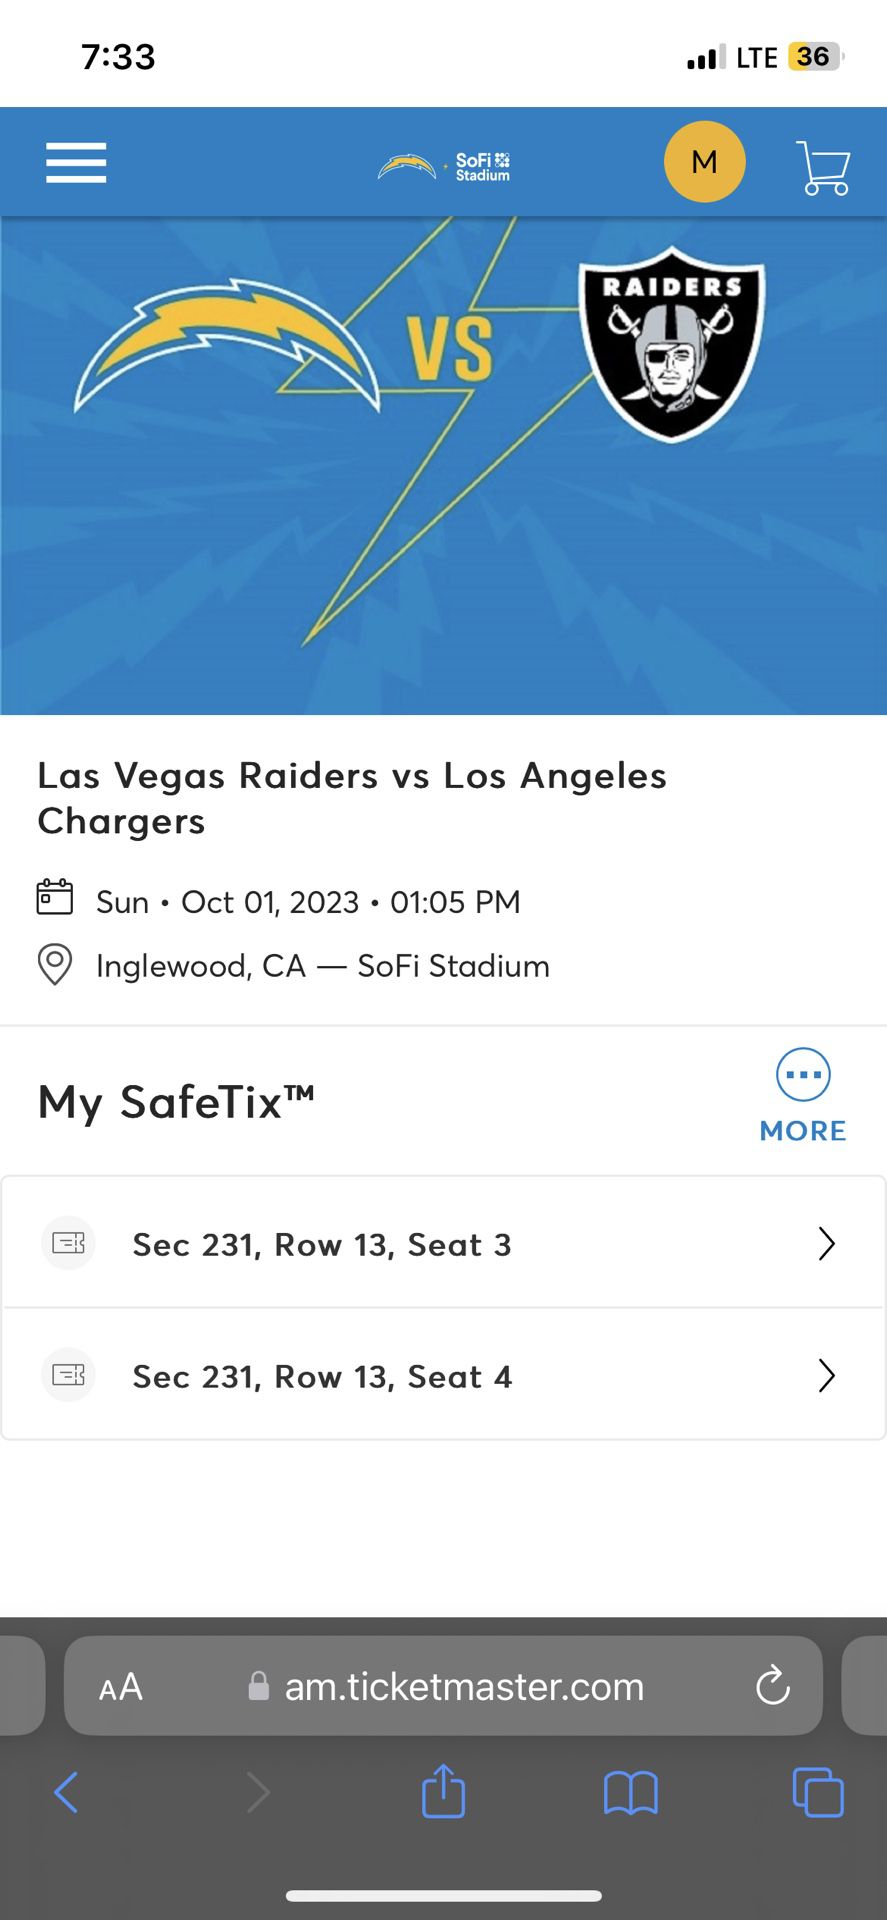 Las Vegas Raiders Vs Los Angeles Chargers Tickets for Sale in San Diego, CA  - OfferUp